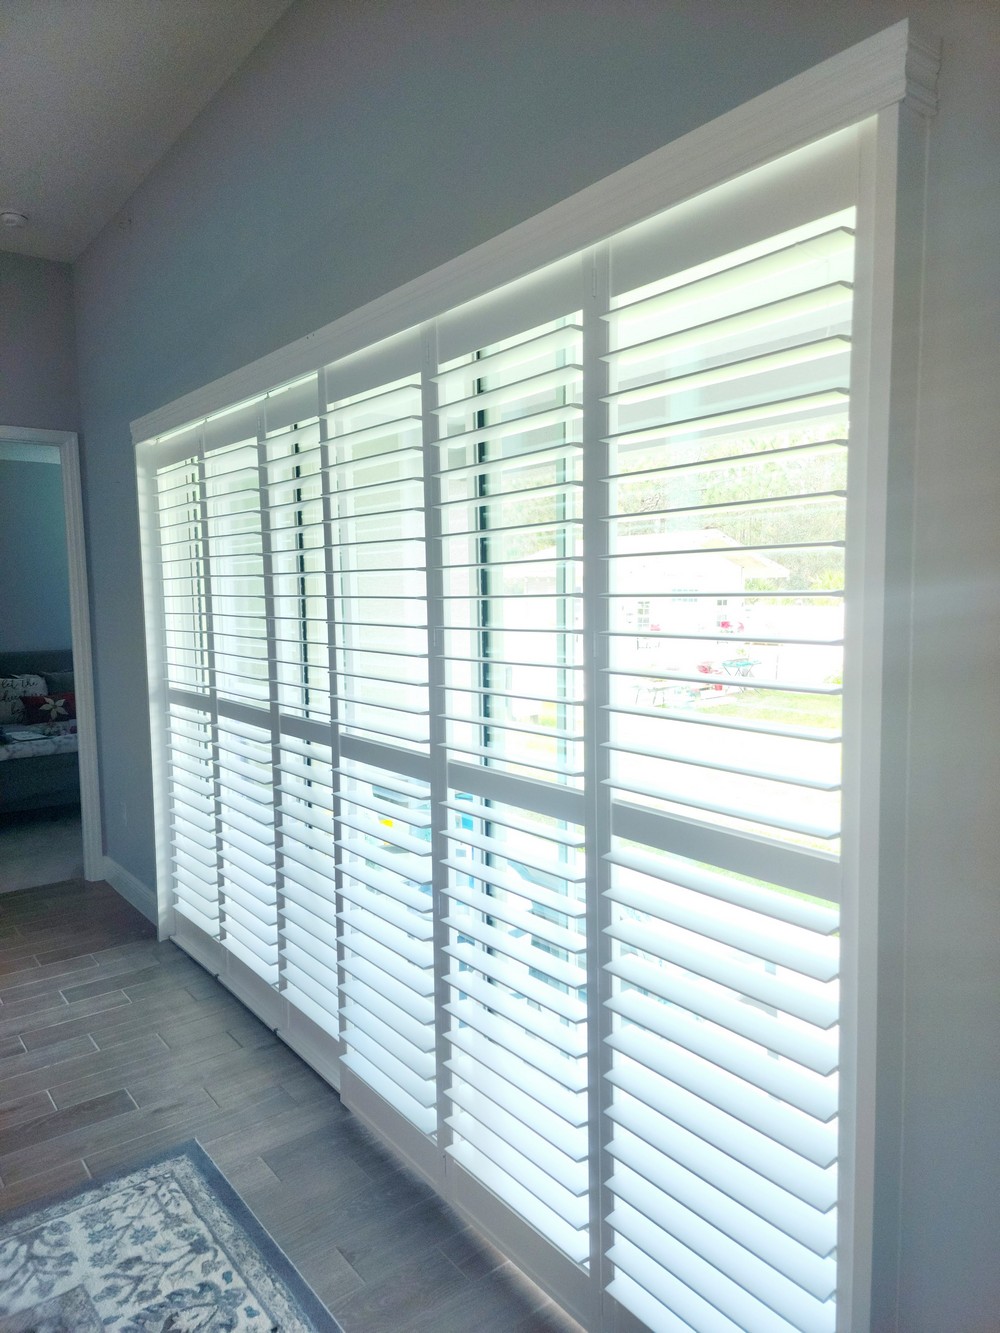 Attention-To-Detail Installation of Bypass Plantation Shutters on Bancroft Blvd in Orlando, FL